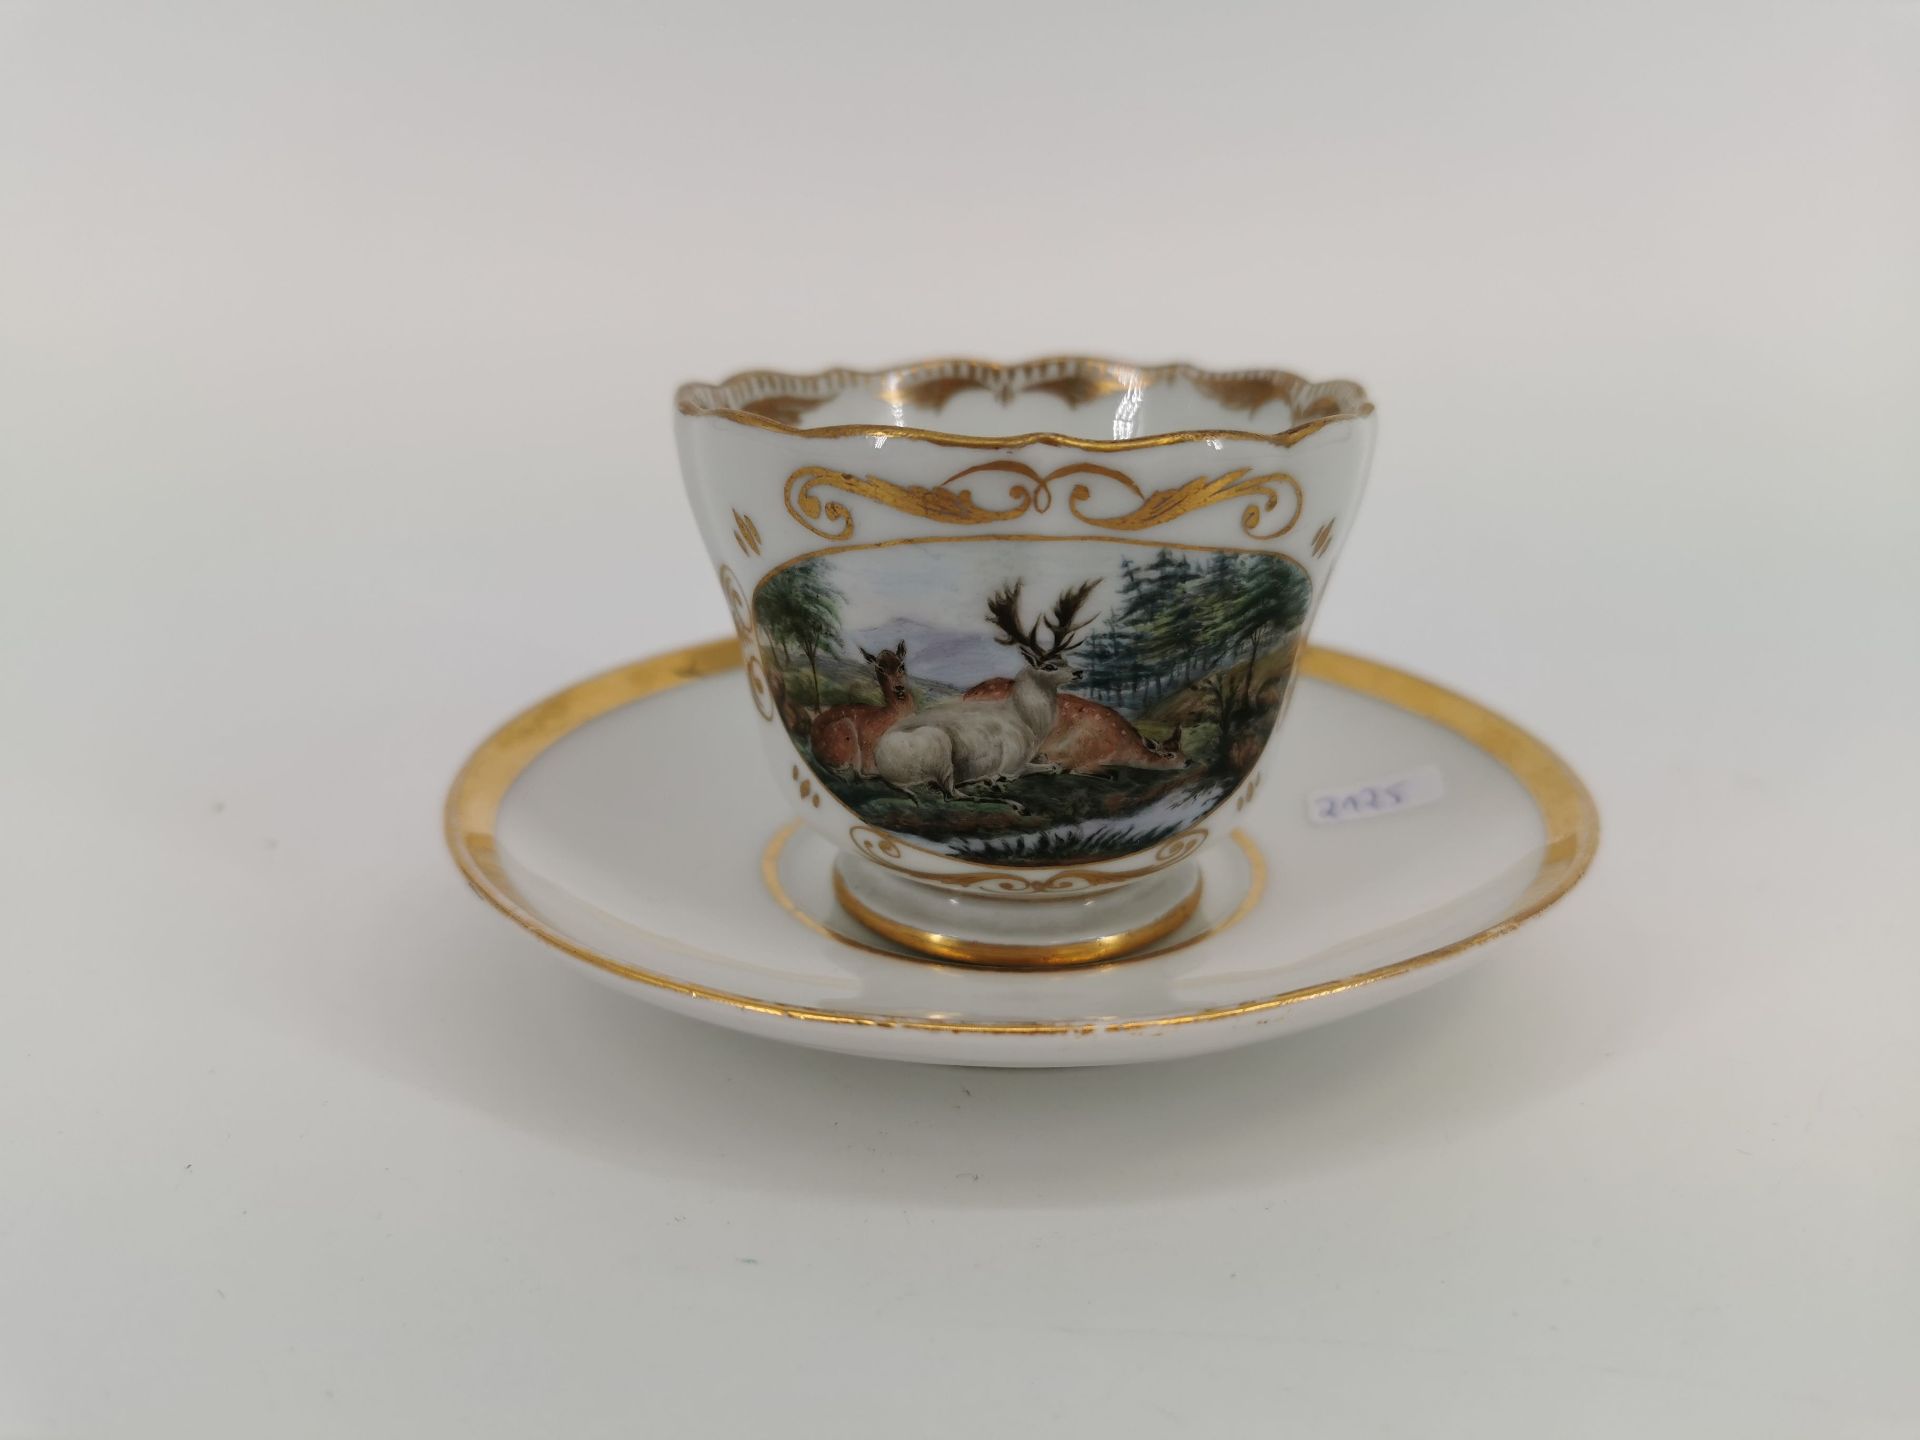 CUP WITH HUNTING SCENE